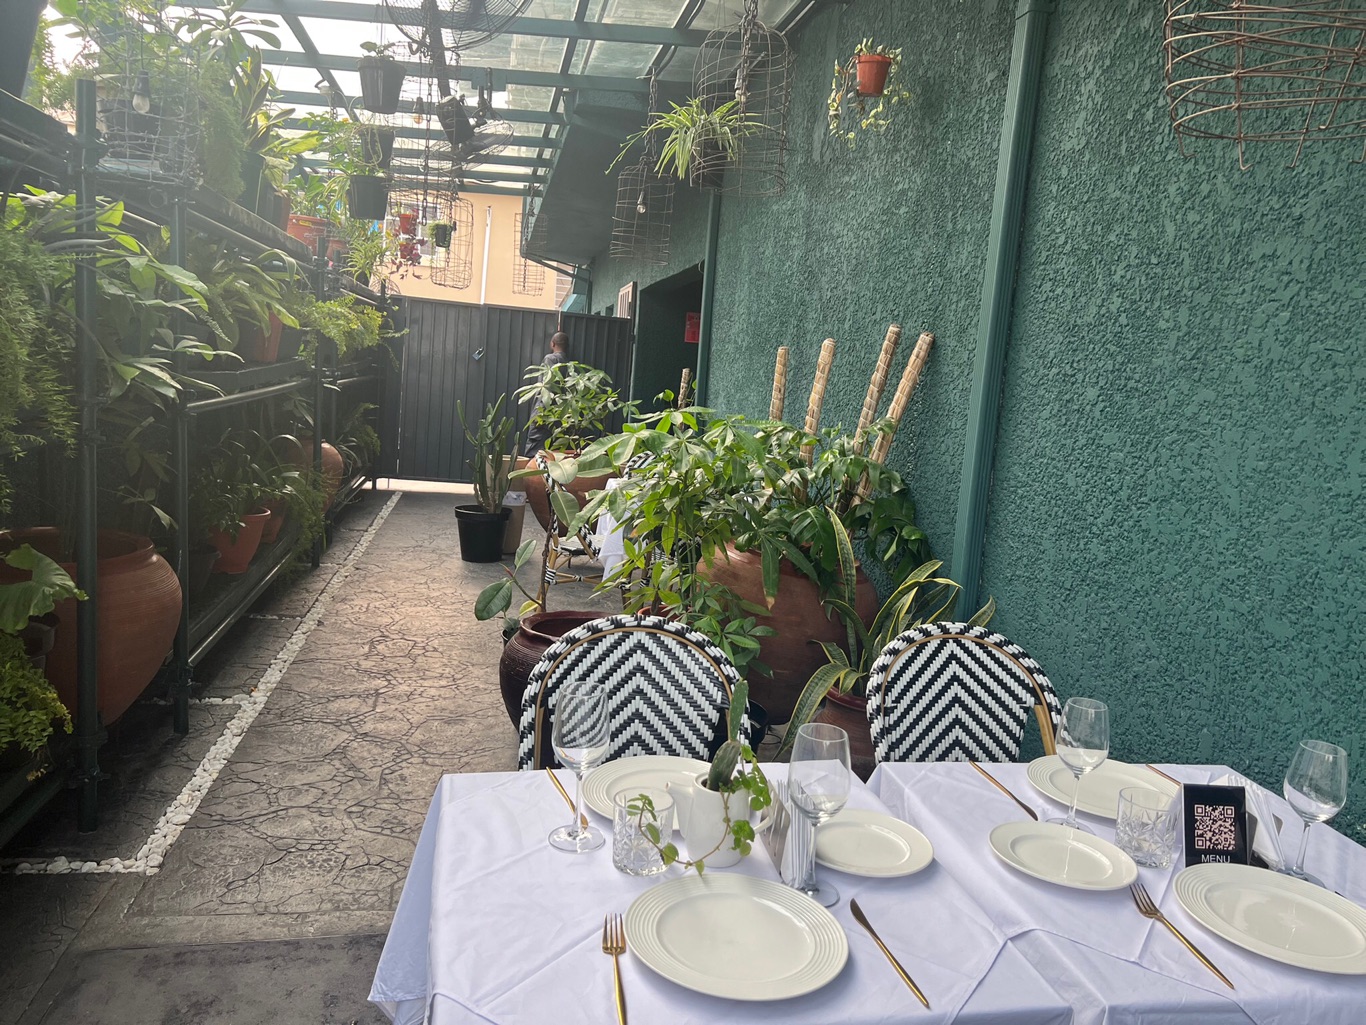 Outdoor dining at the greenery space in SEE Lagos